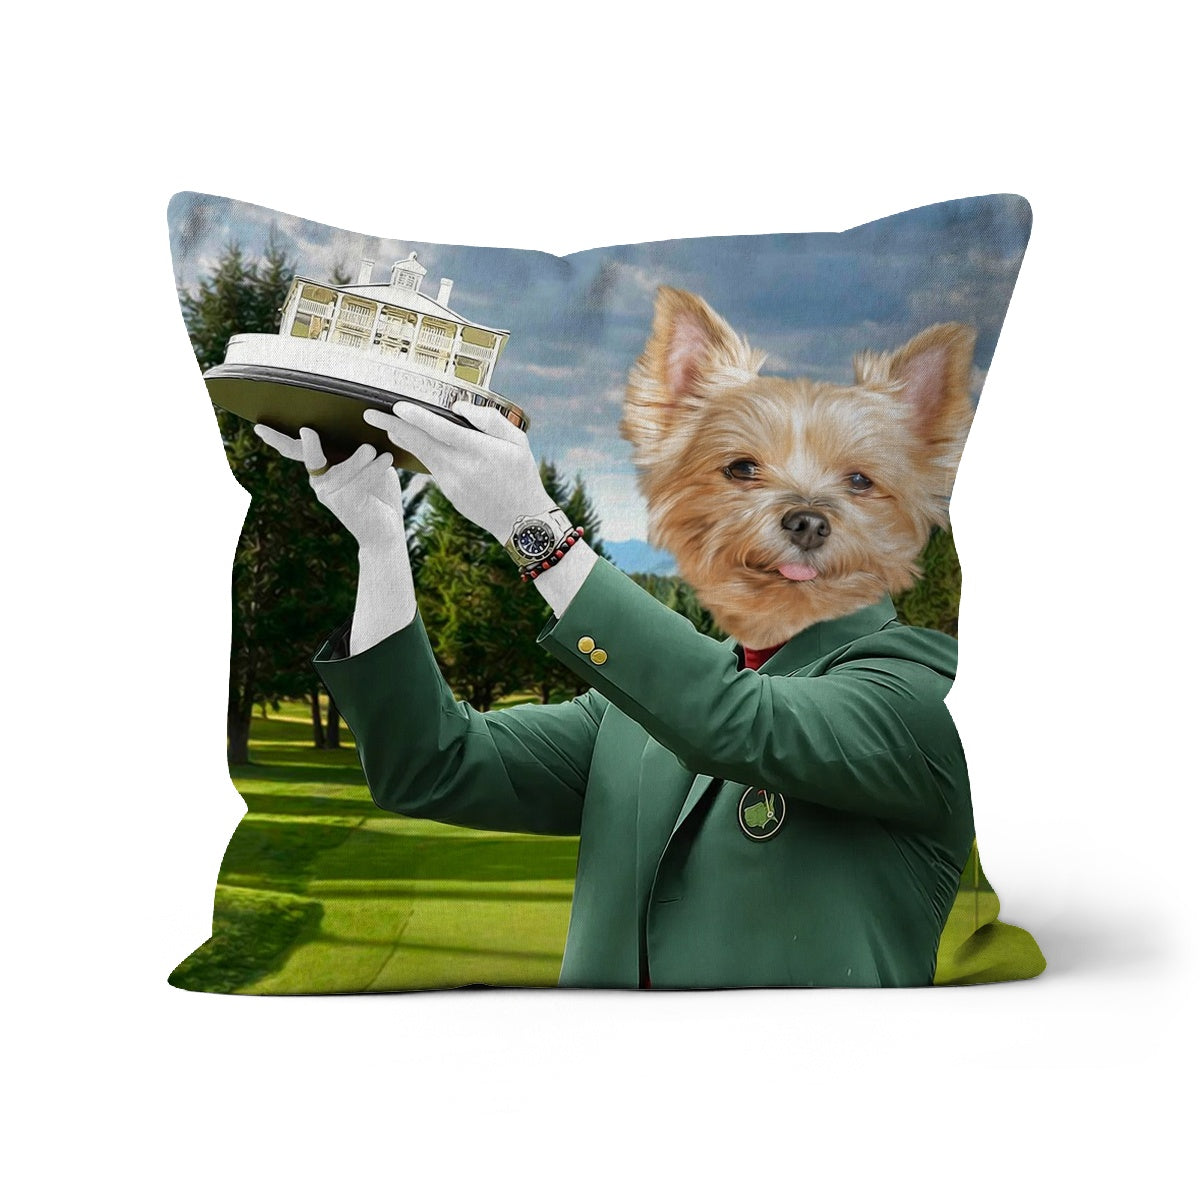 The Master: Custom Pet Pillow, Paw & Glory, paw and glory,  personalised dog pillows, dog photo on pillow, pillow with dogs face, dog pillow cases, pillow custom, pet custom pillow